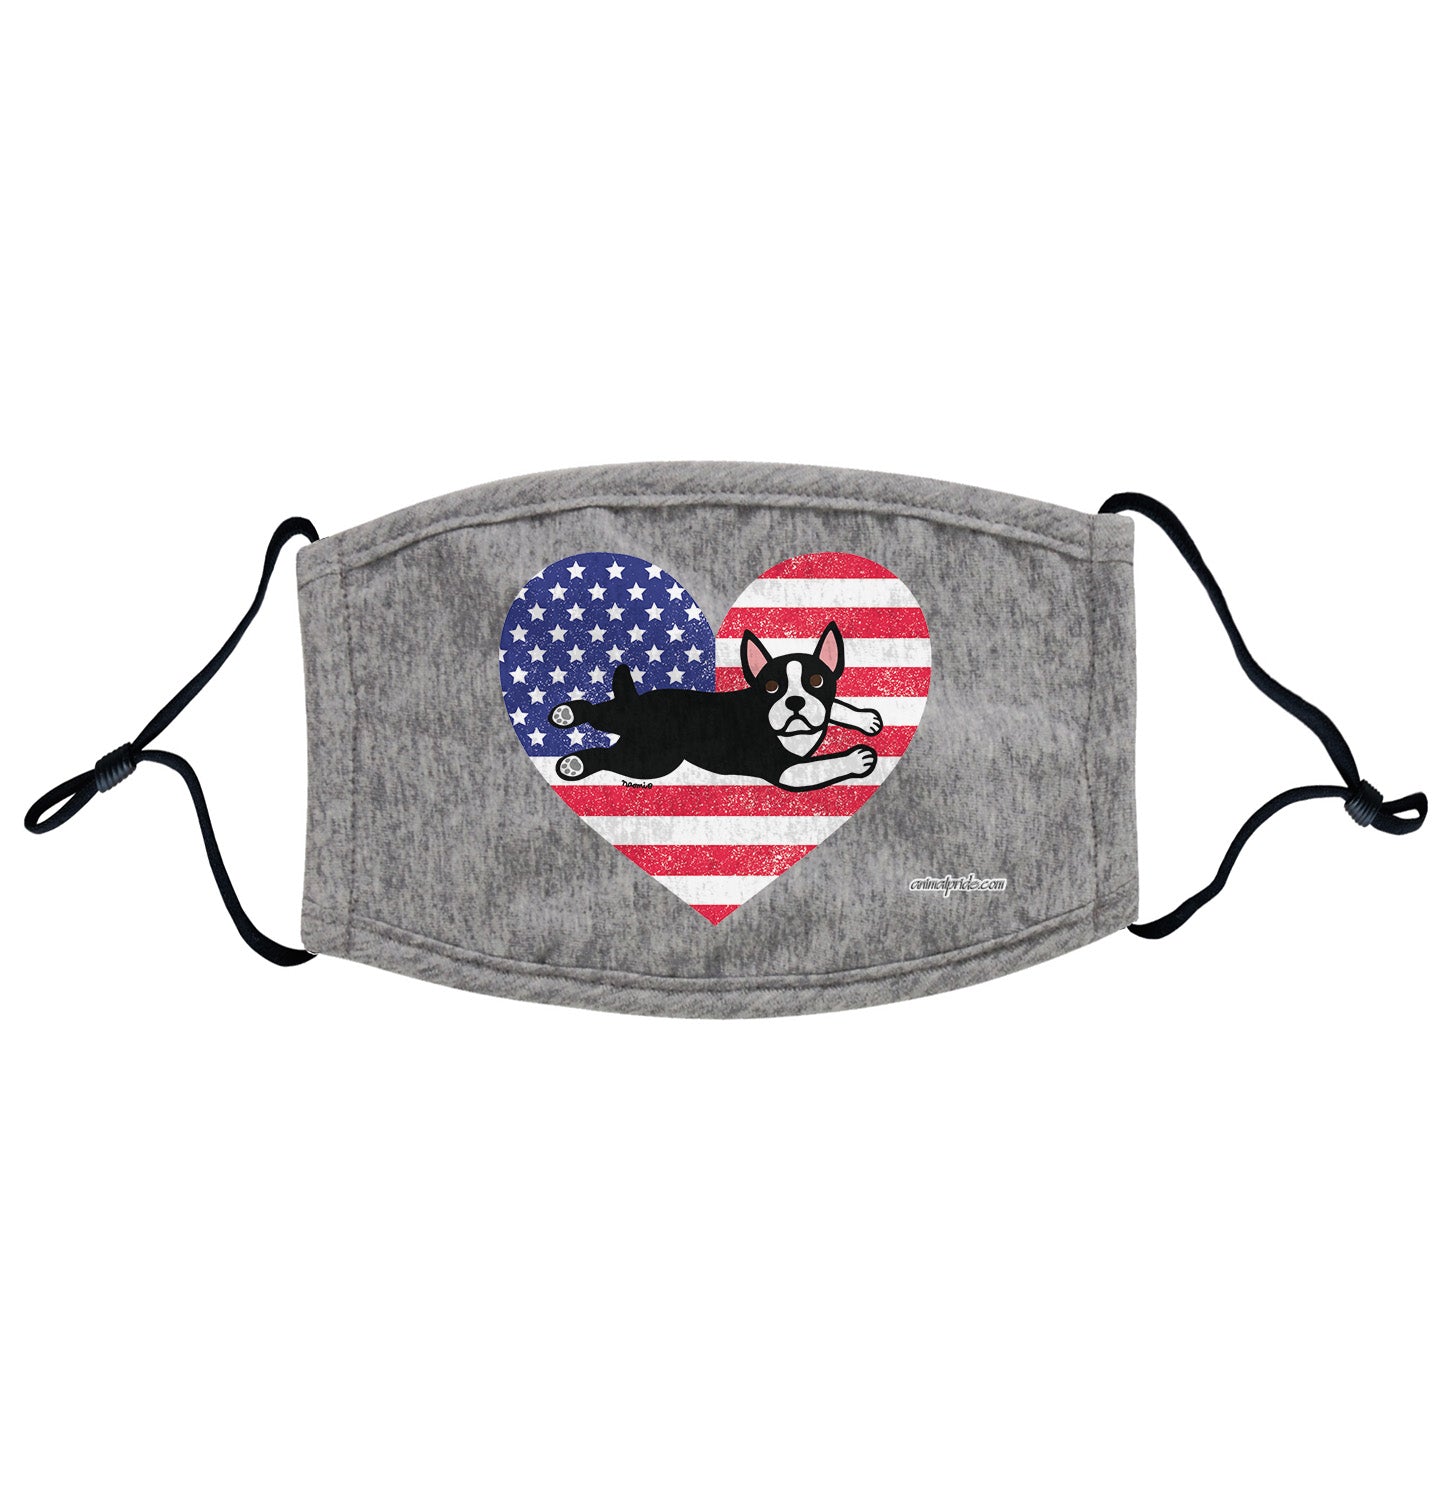 Terrier Flag Heart - Adjustable Face Mask, Breathable, Reusable, Printed in USA